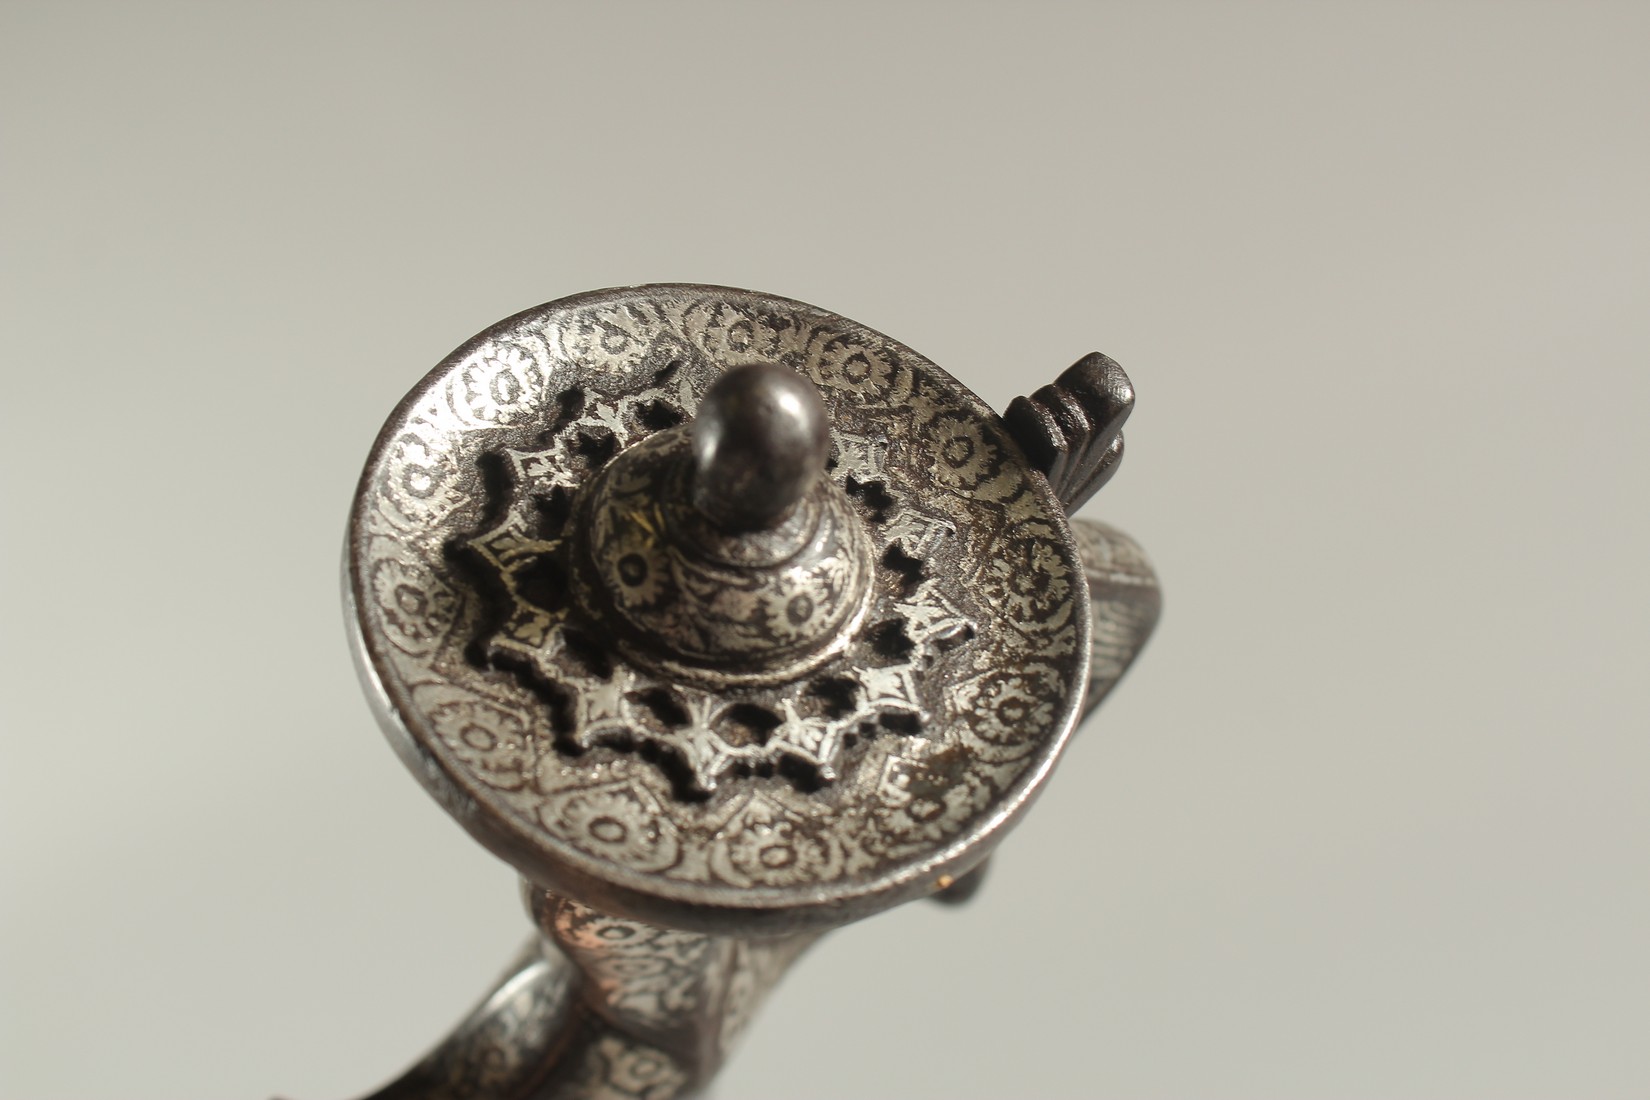 AN 18TH CENTURY MUGHAL INDIAN TULWAR SWORD, with silver inlaid hilt and signed blade. - Image 8 of 8